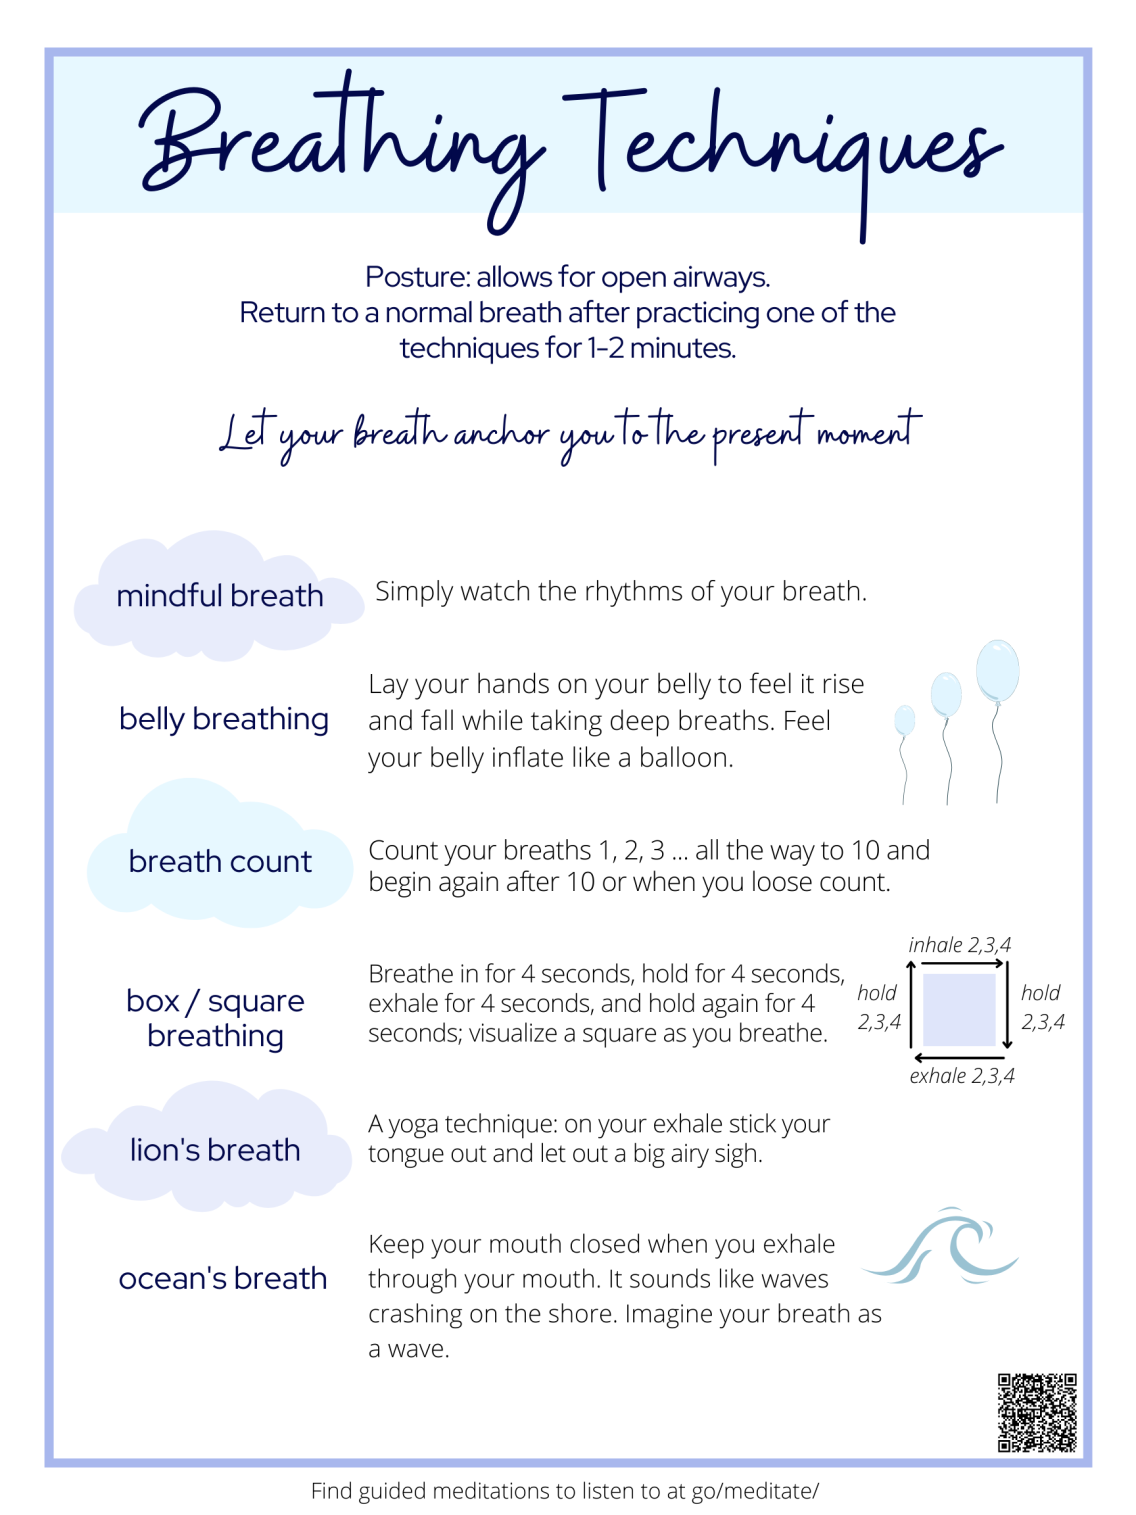 breathing techniques poster with clouds and balloons and a wave, a diagram with breathing in and out is also shown